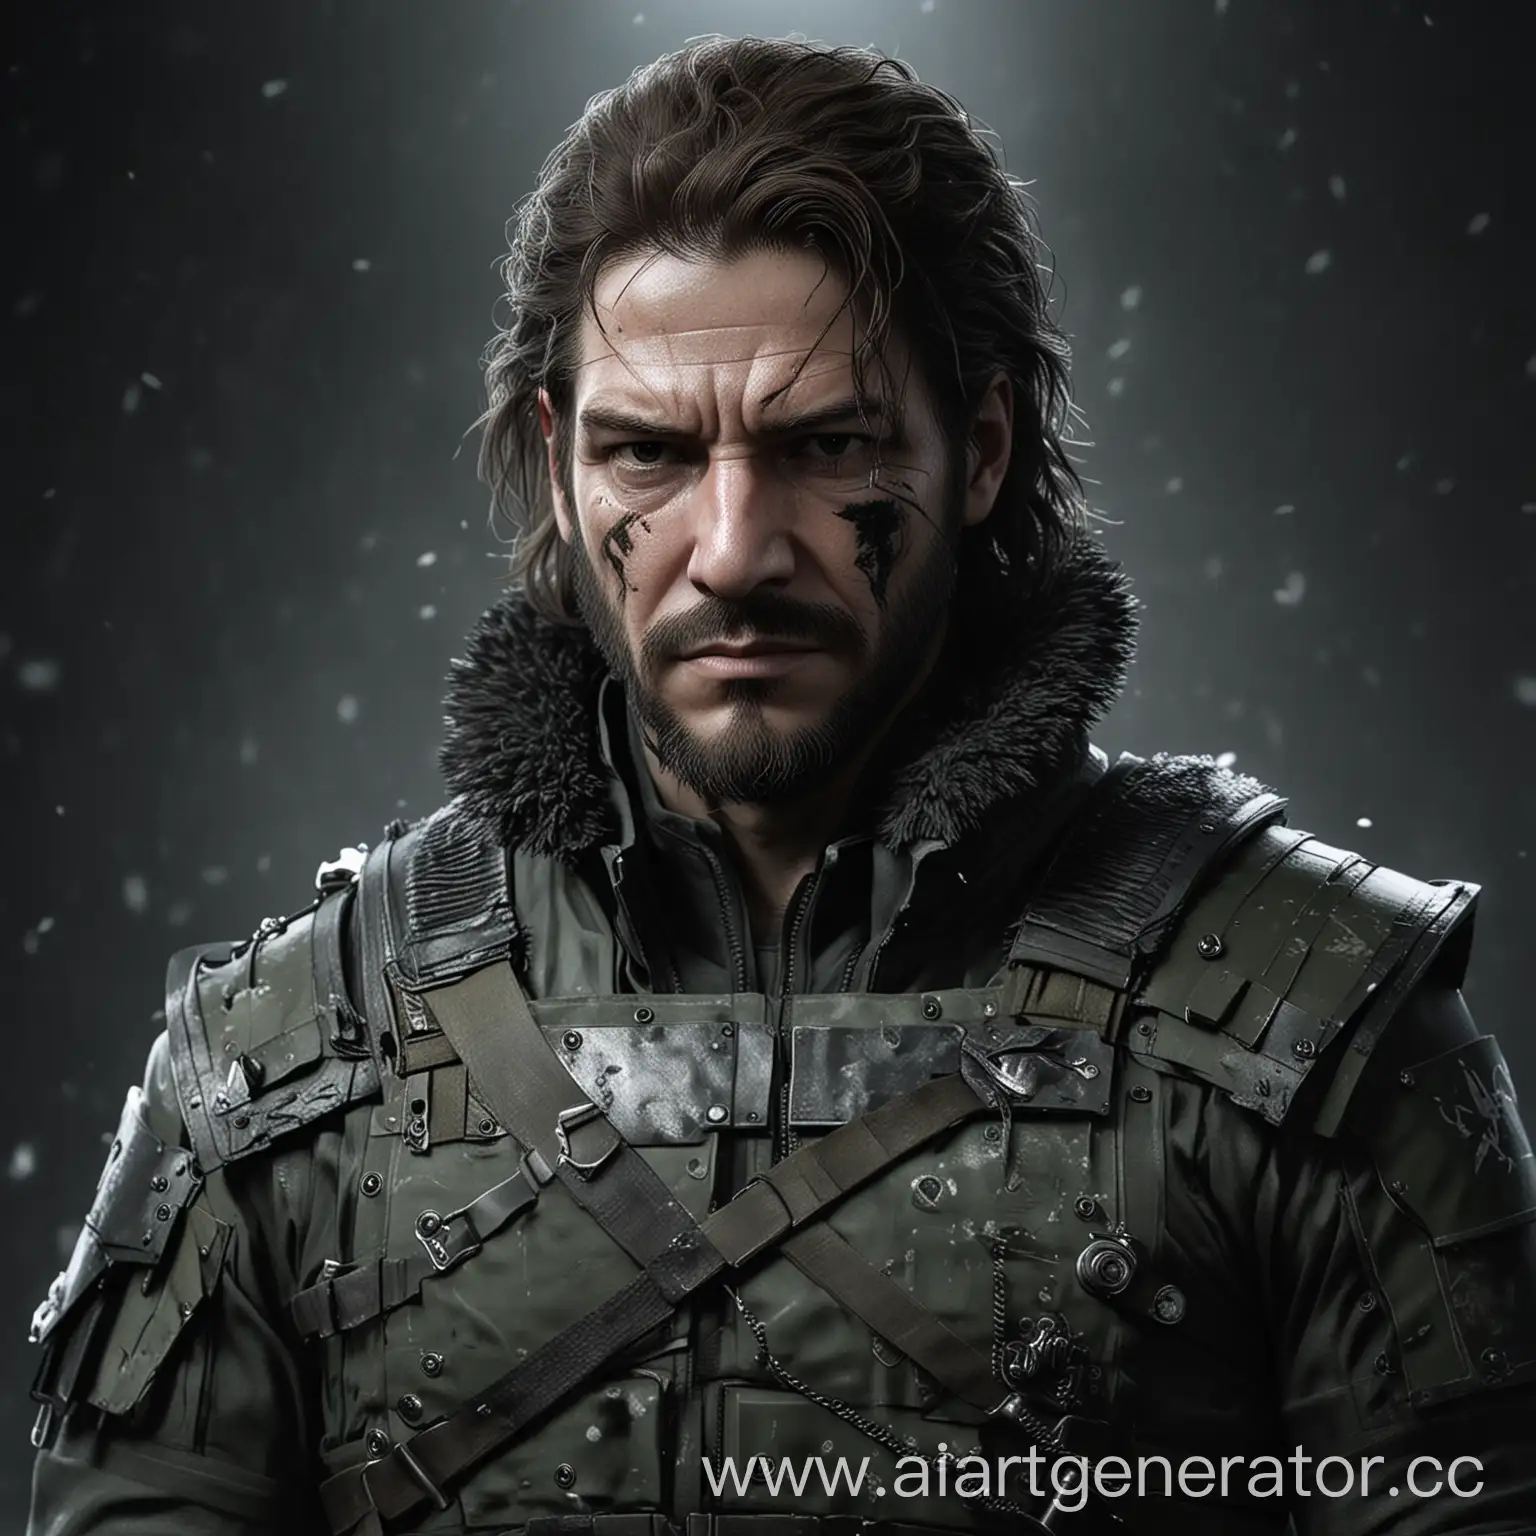 Huey Emmerich(game metal gear solid) and Jon Snow(serial game of thrones)